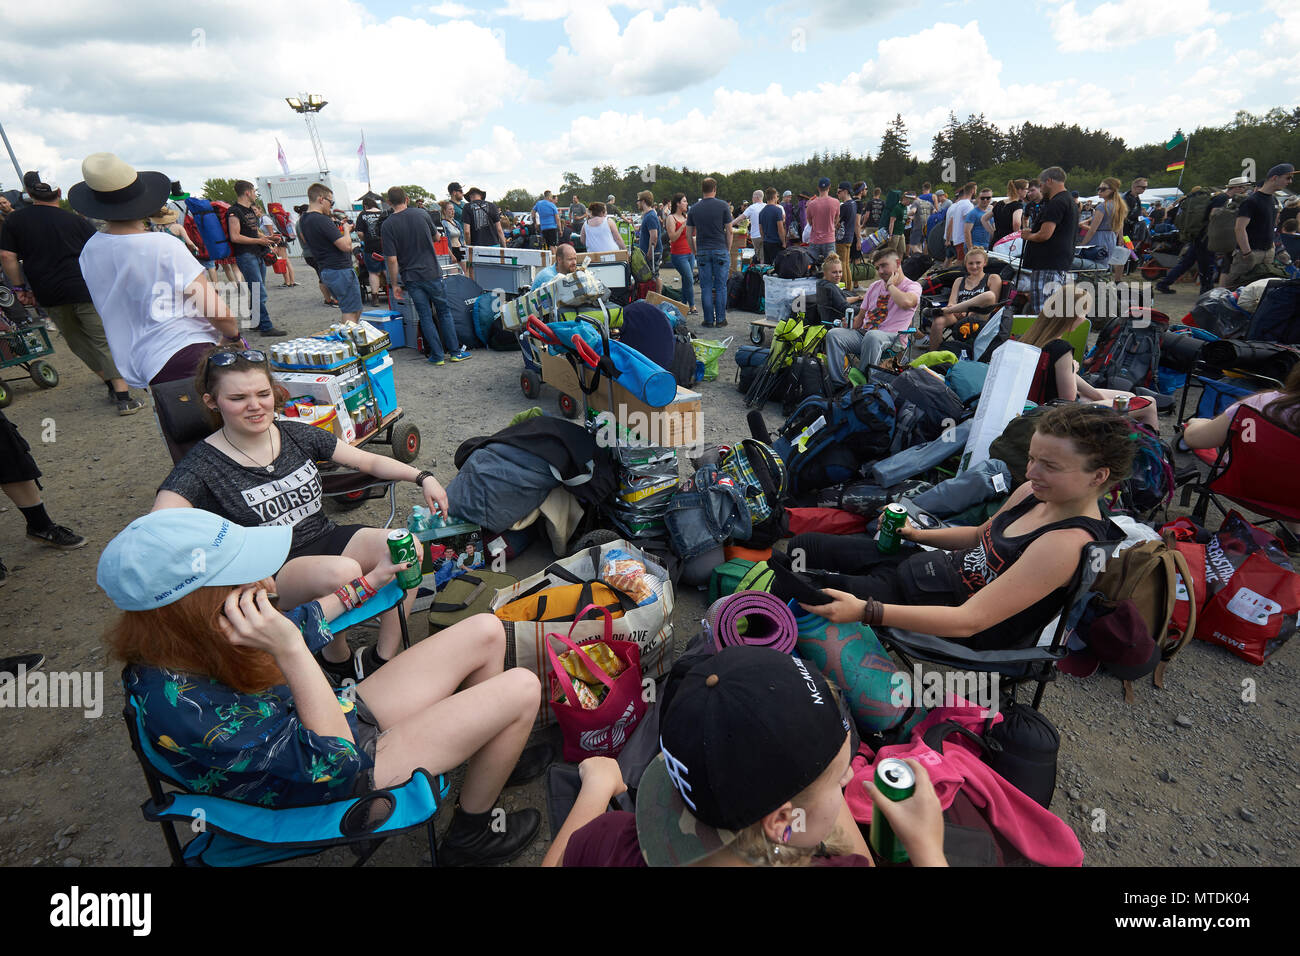 30 May 2018, Germany, Nuremberg: Rock fans arrive with heavy luggage on the  camping grounds of the music festival "Rock am Ring". A total of 80 bands  are lined up to play